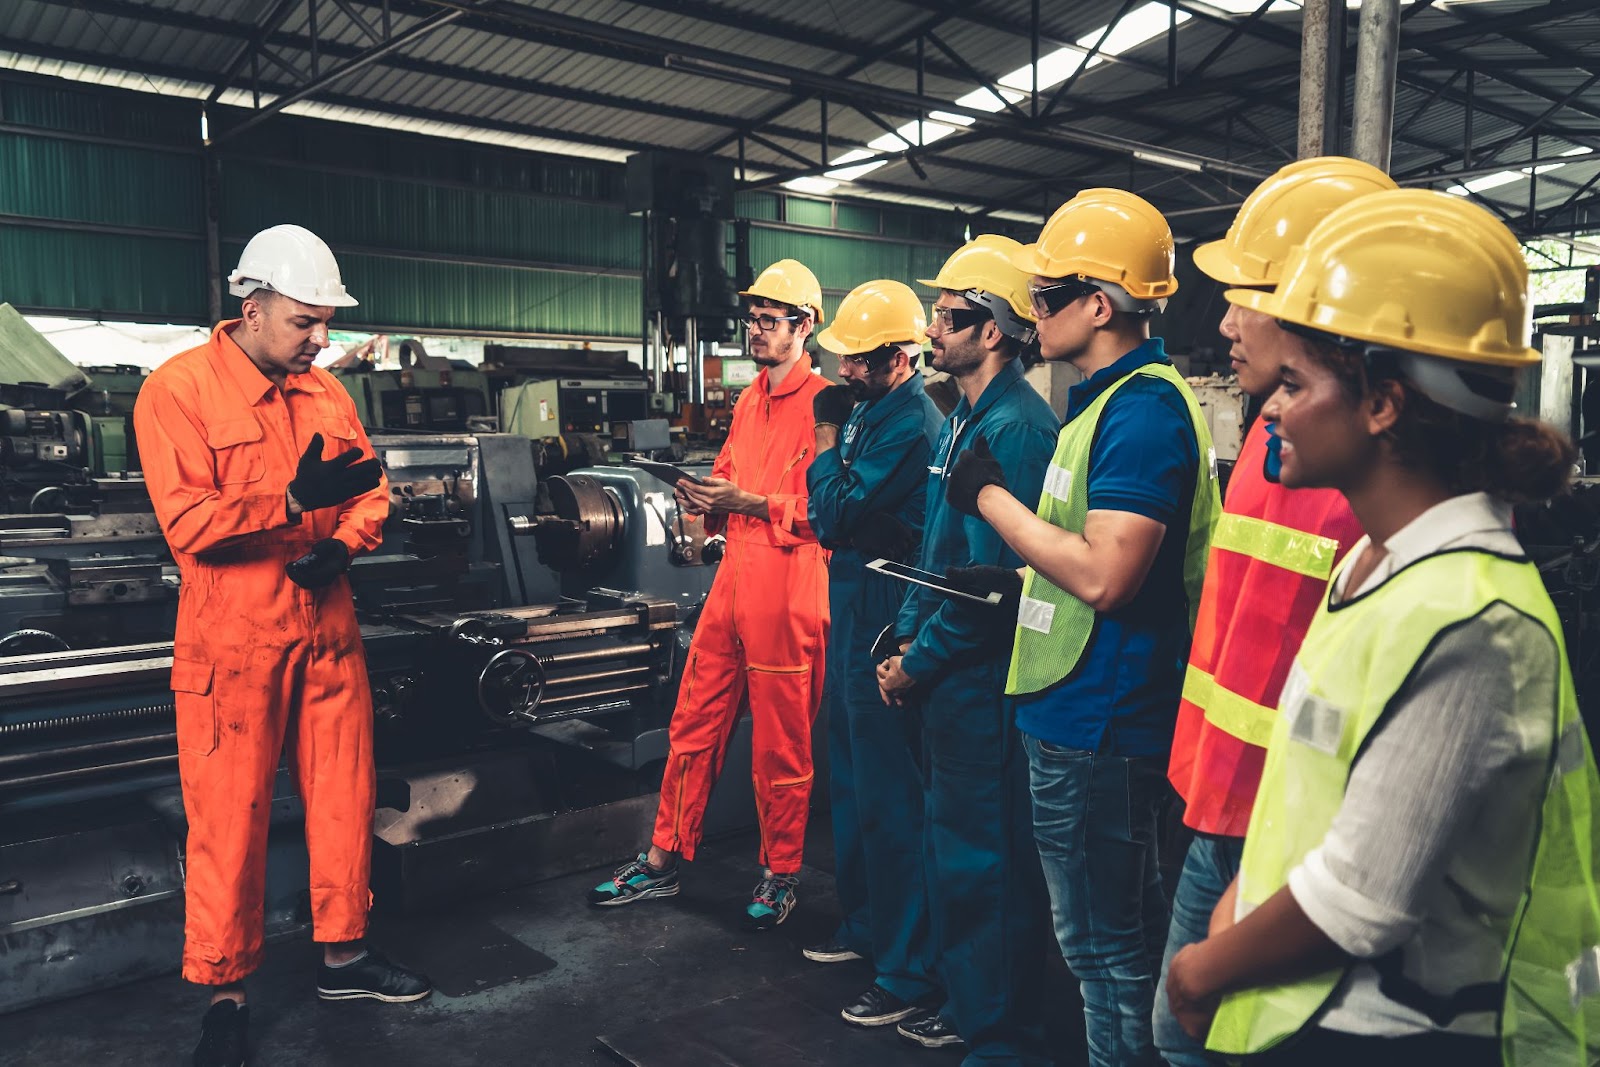 Importance of Safety Training on a Job Site